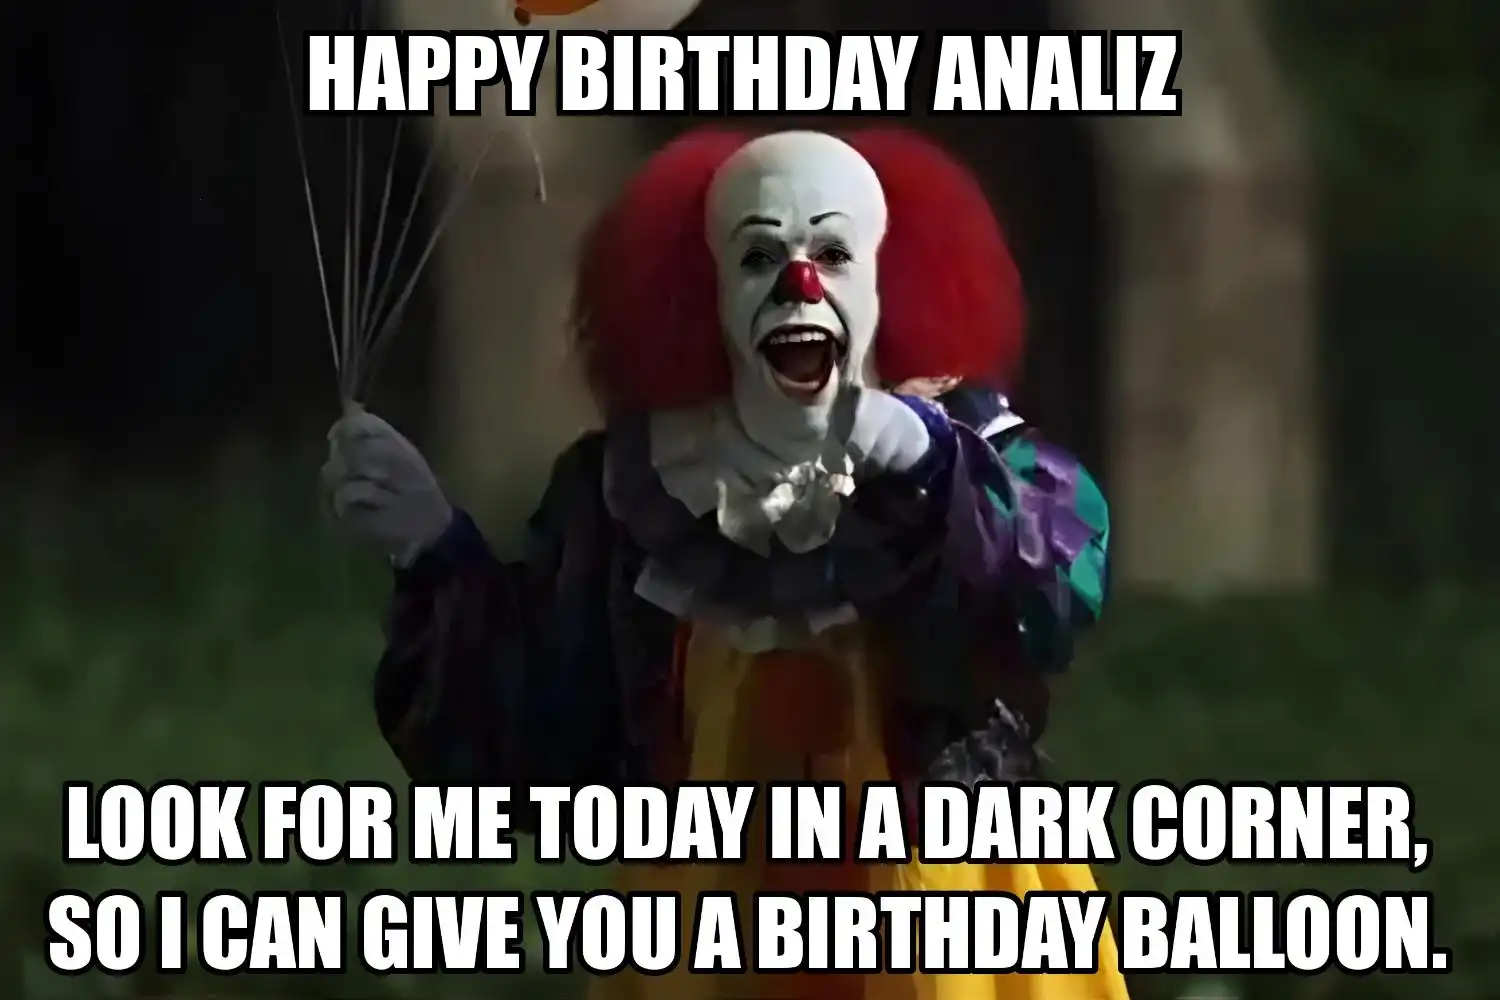 Happy Birthday Analiz I Can Give You A Balloon Meme